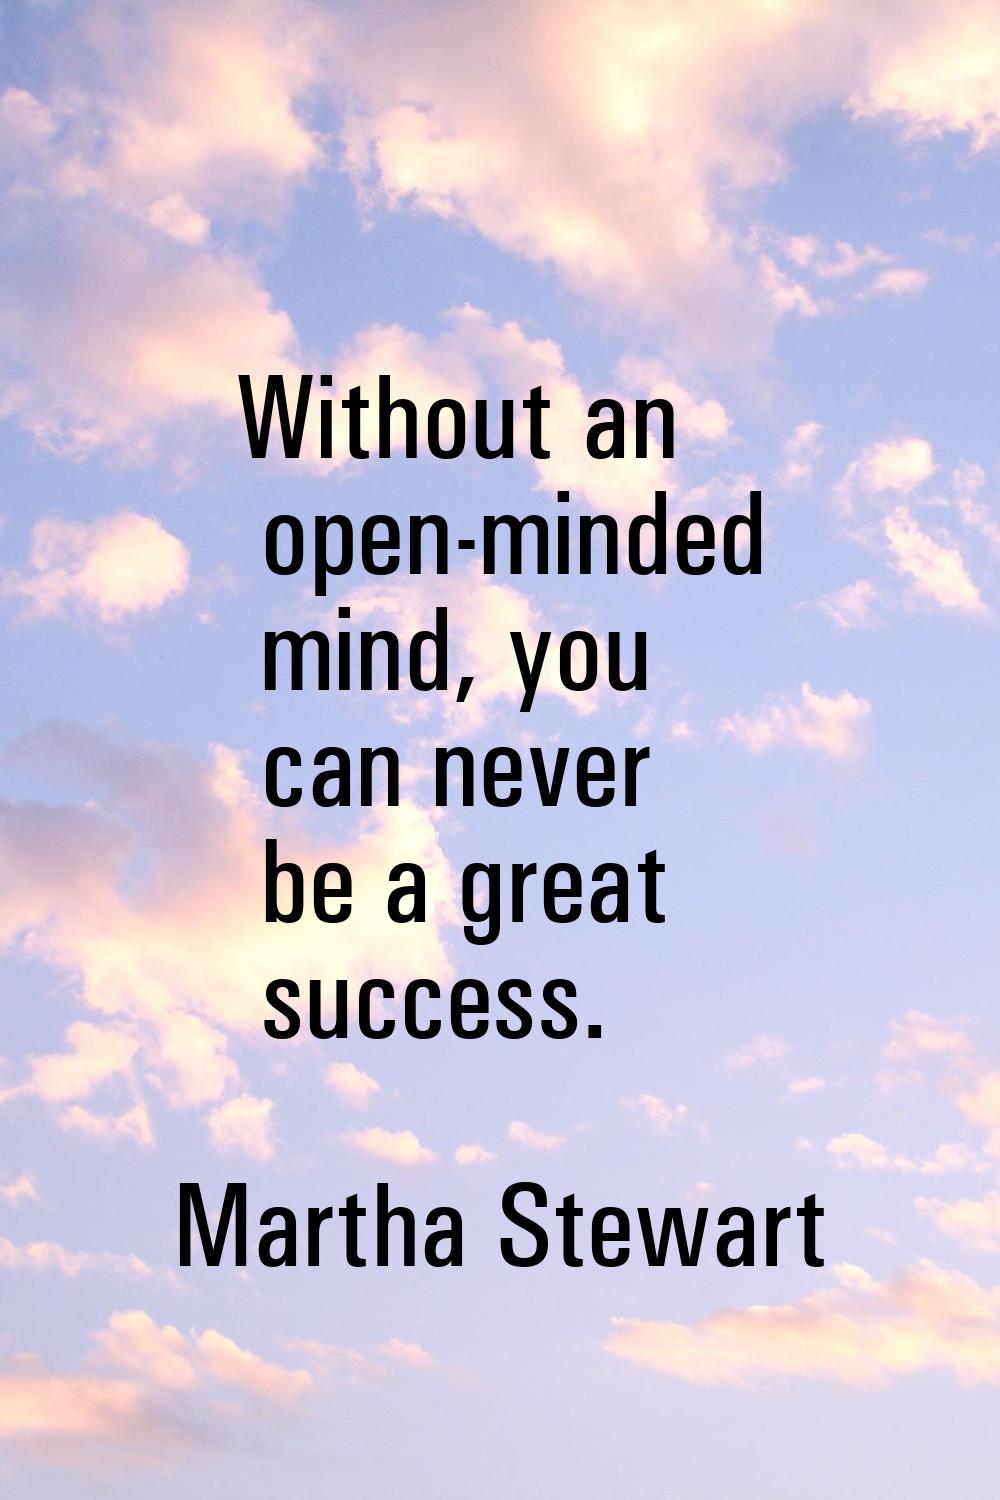 Without an open-minded mind, you can never be a great success.